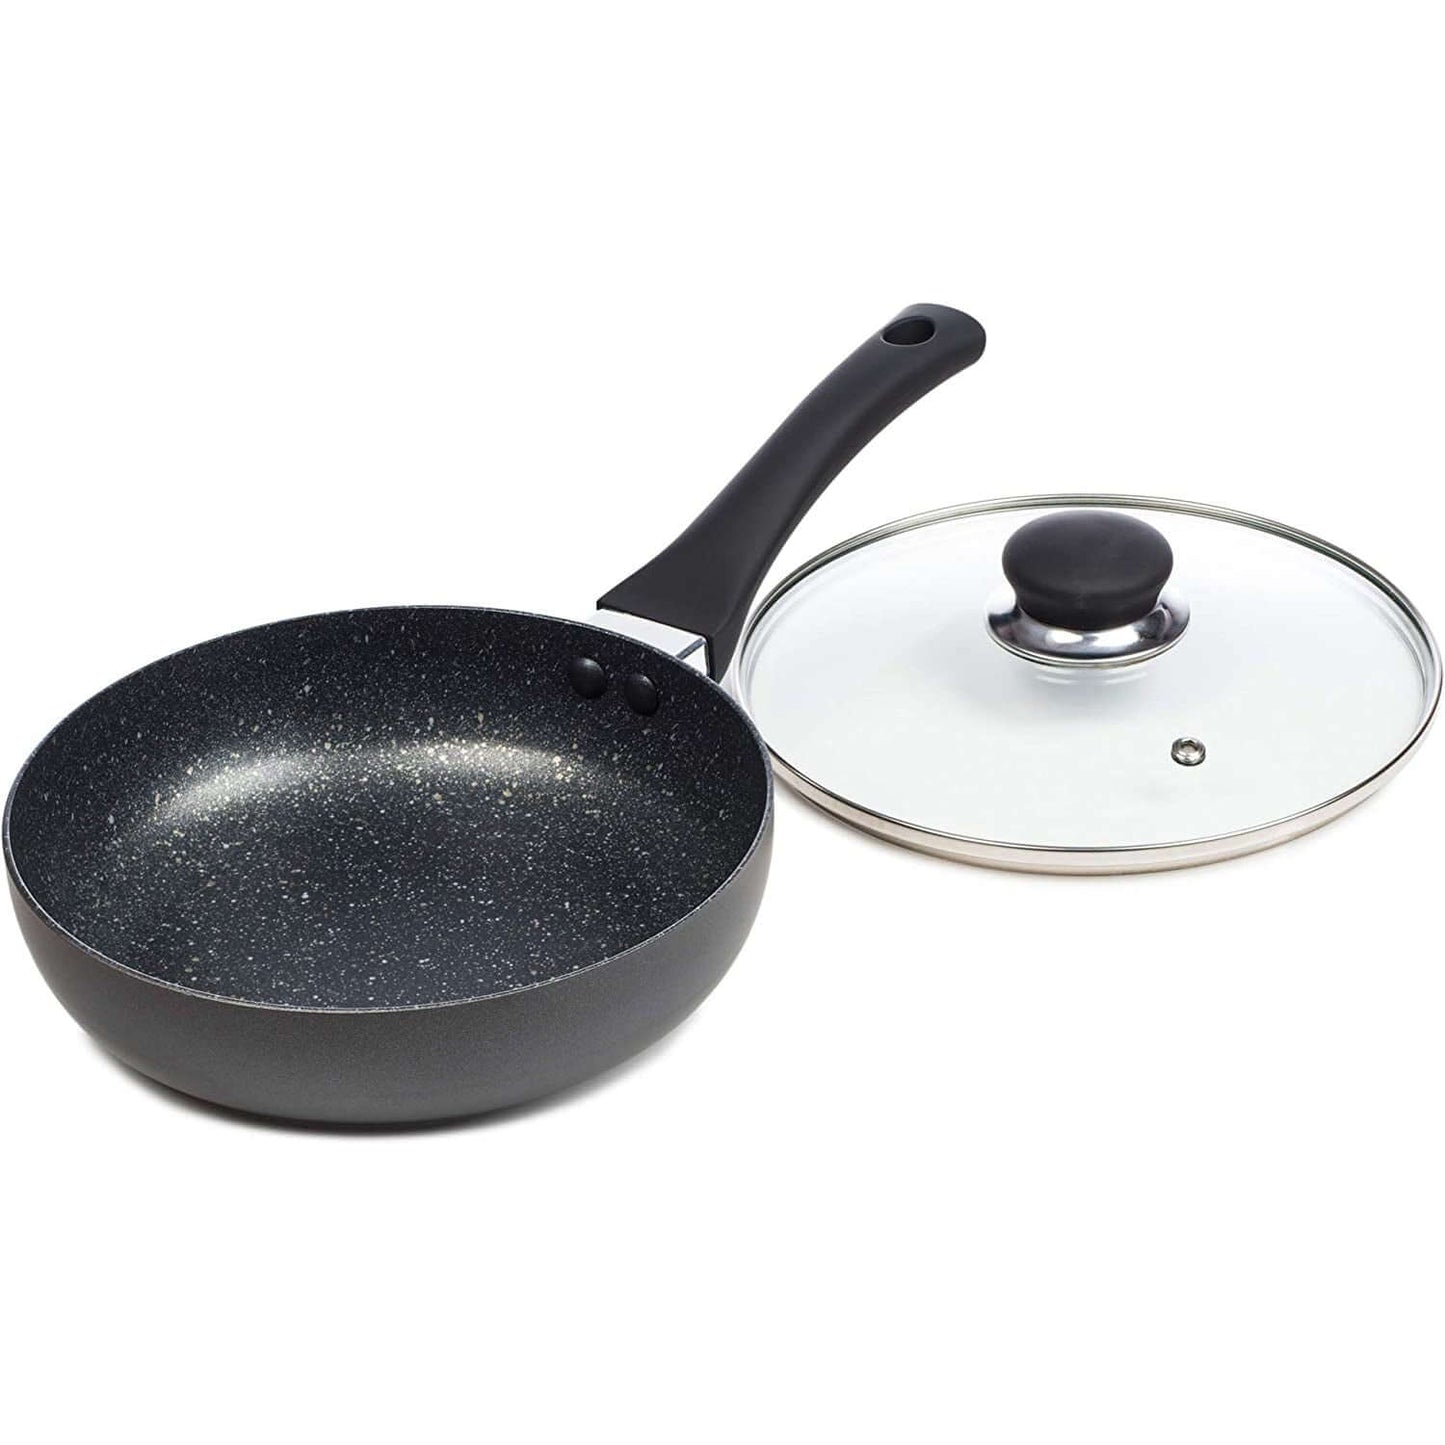 4 Eggs ChefMate 20cm Poacher Pan - Non Stick Poached Egg Boiler & Frying Pan in One - Induction Suitable